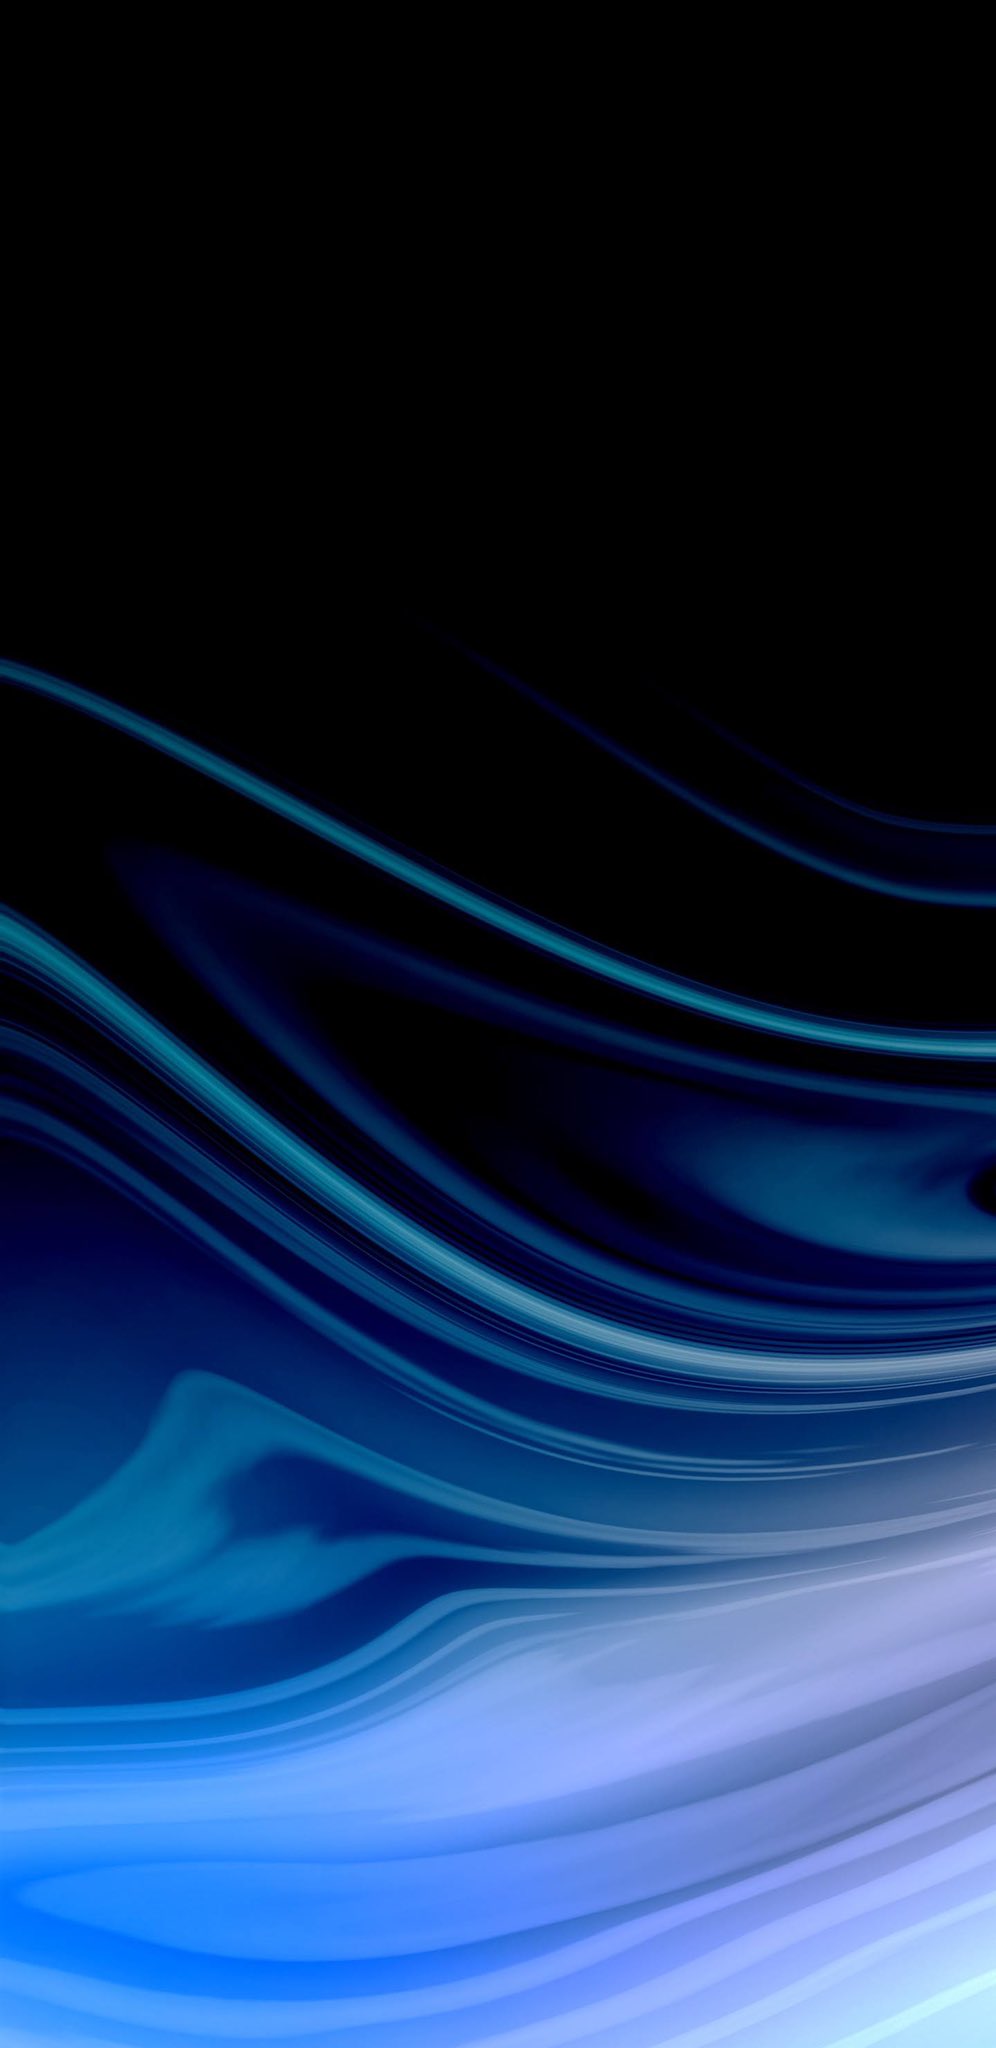 Download these blue wallpaper for iPhone, iPad